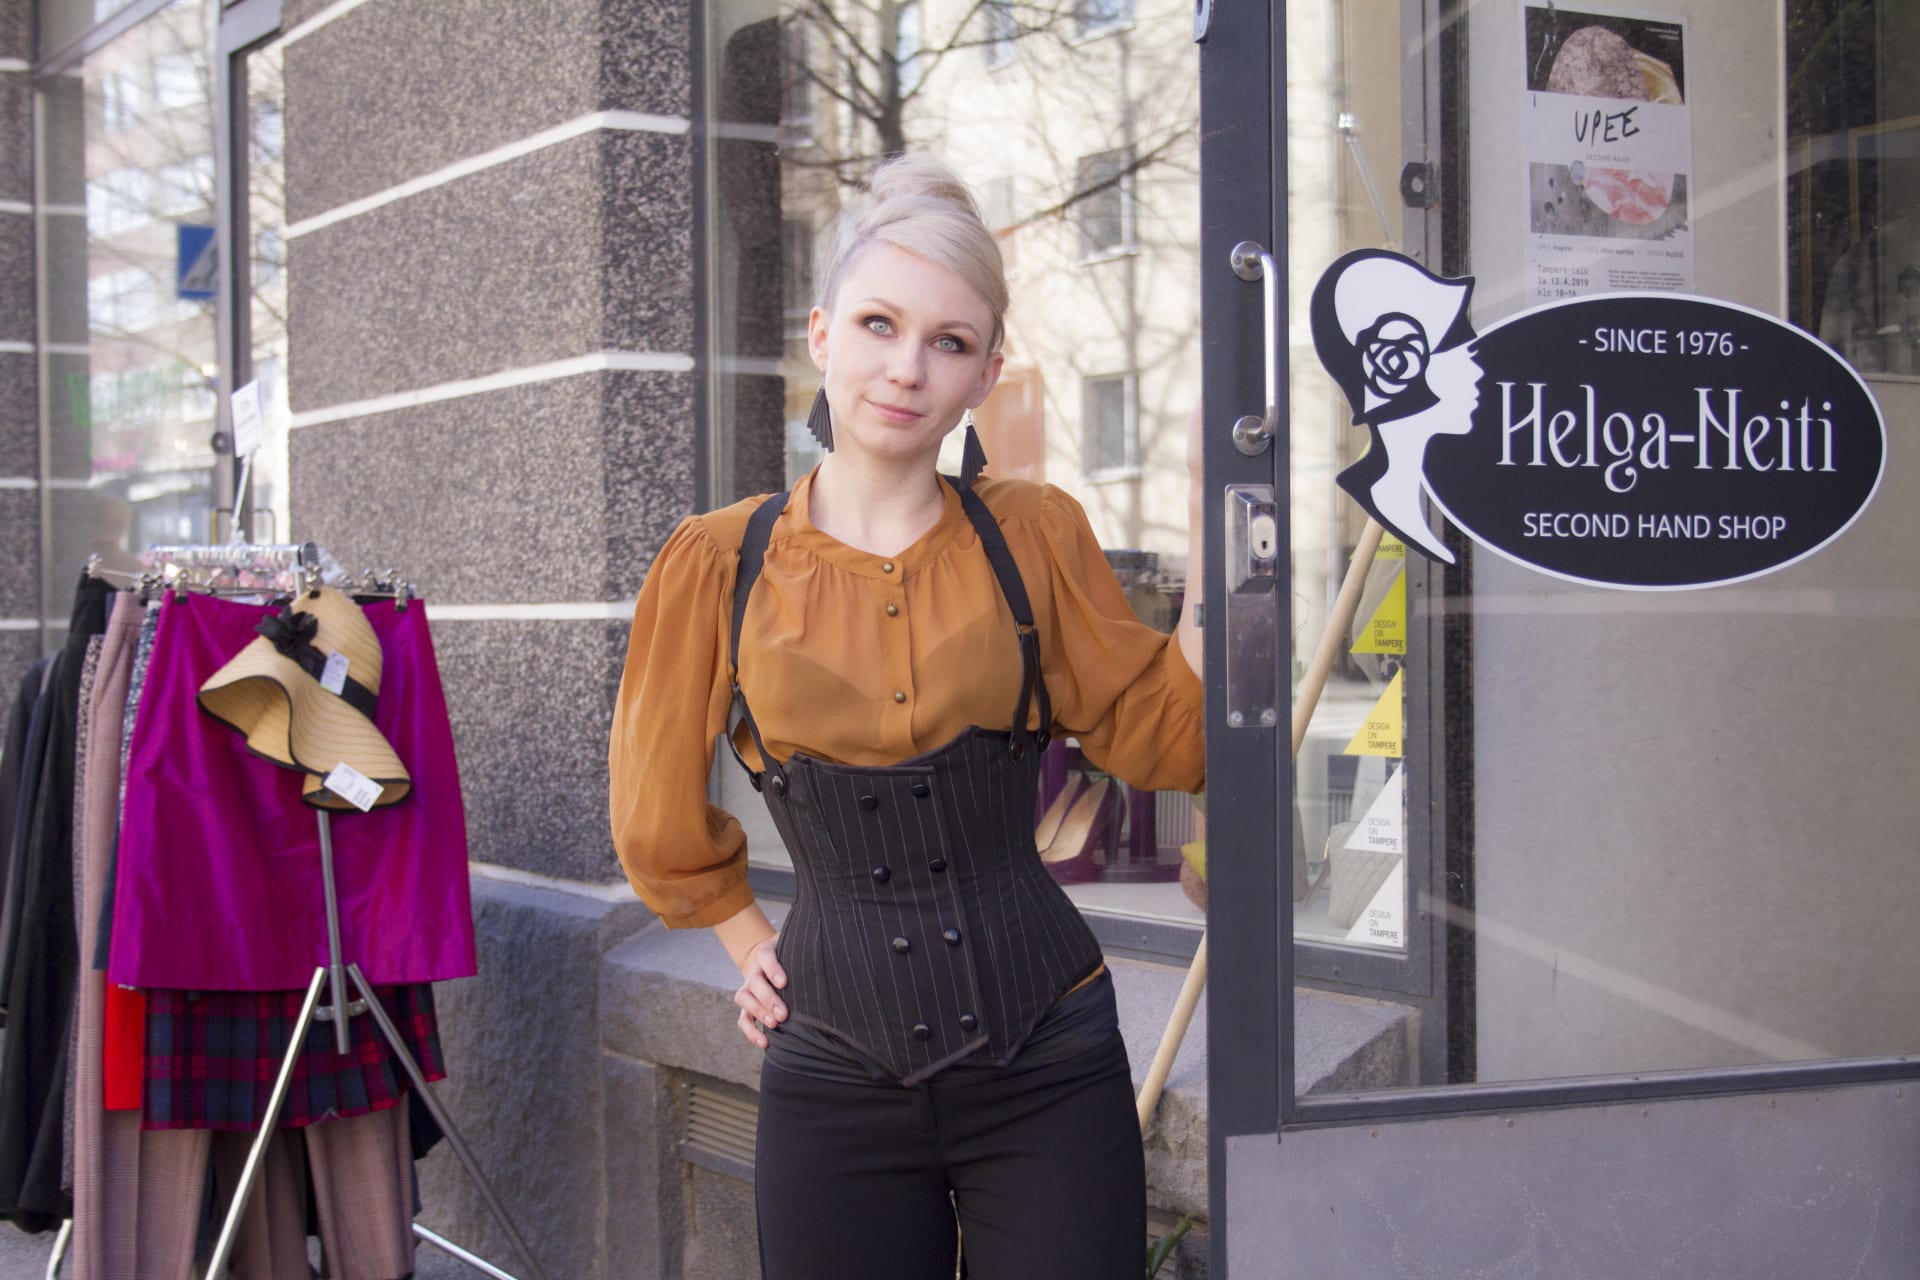 Welcome to Helga-Neiti, the oldest second hand shop in Tampere!